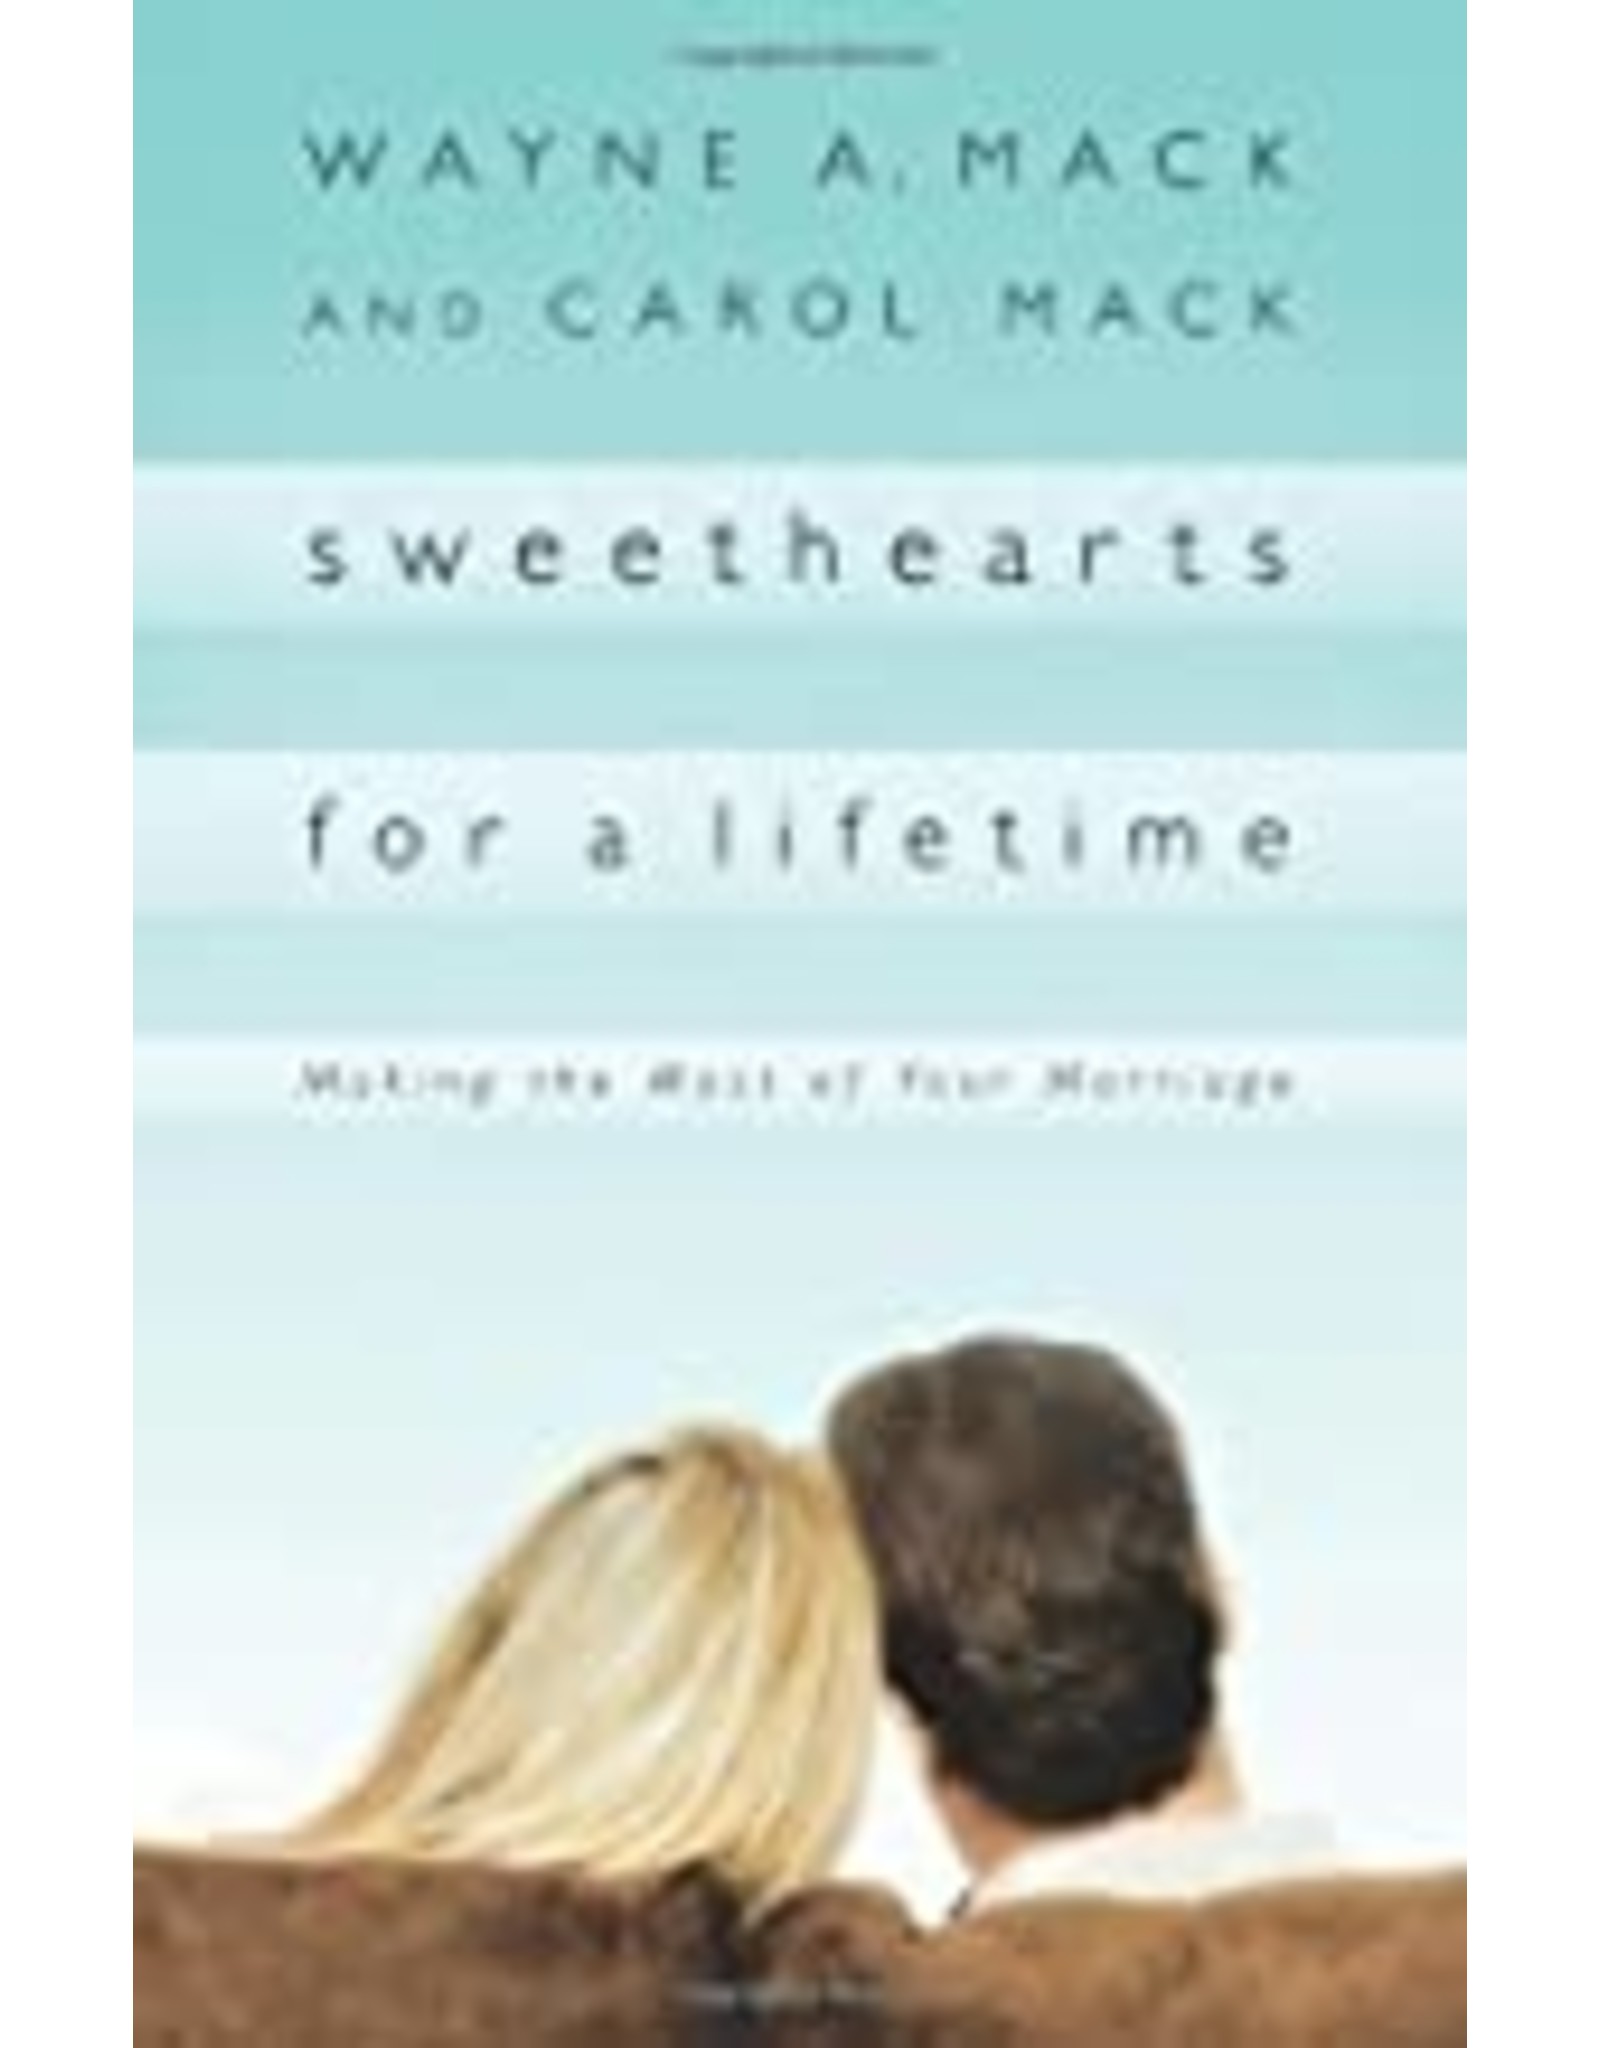 Mack Sweethearts for a Lifetime